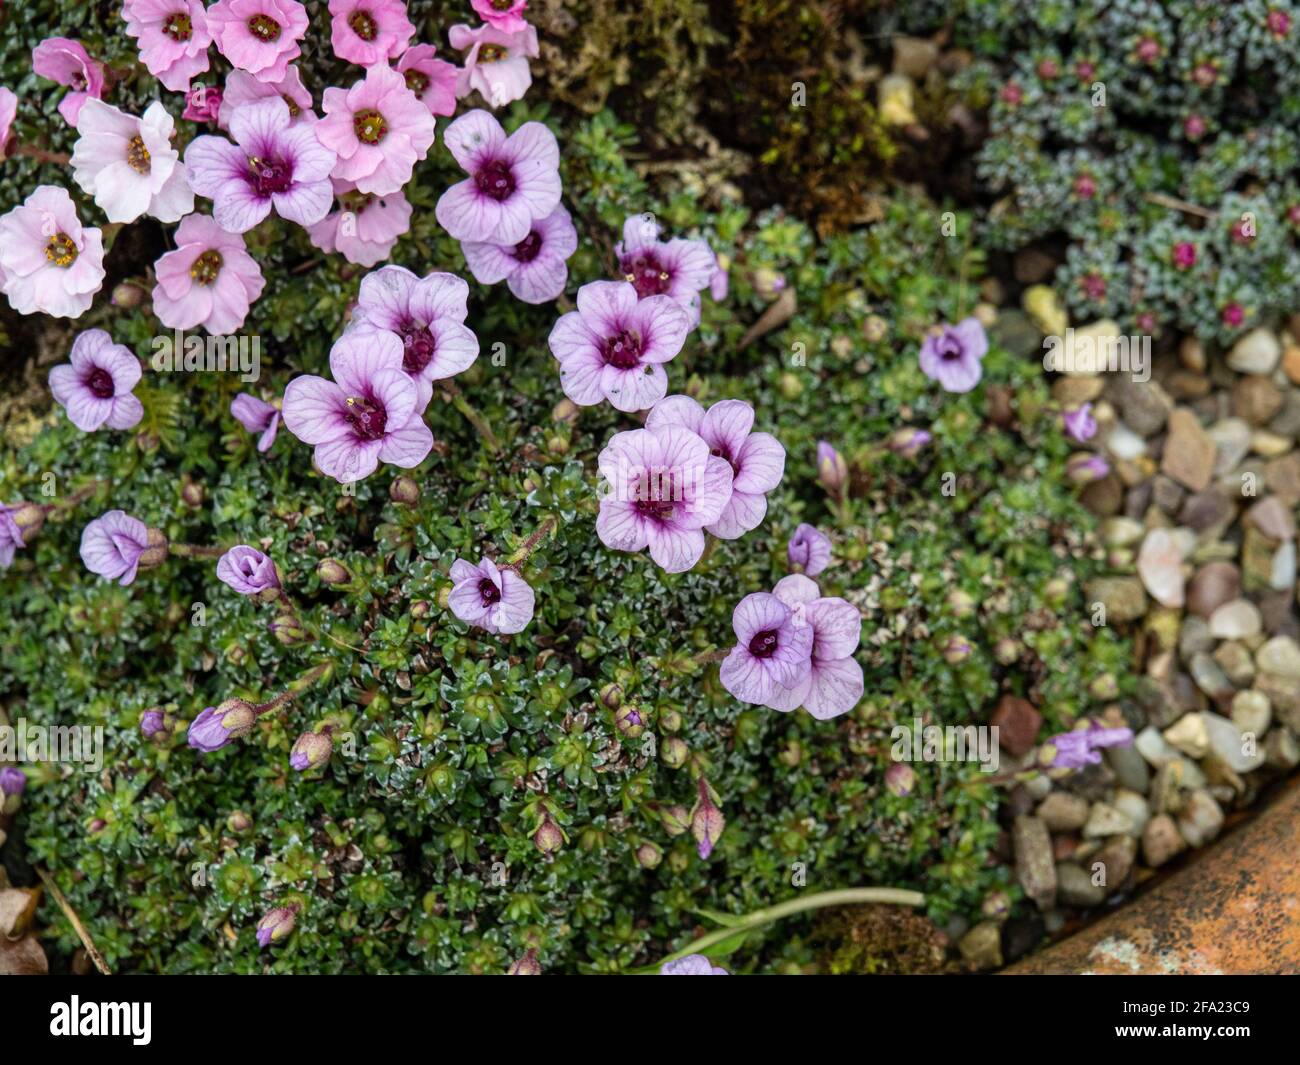 A plant of the kabschia Saxifraga lilacina growing in a terracotta pan and showing the lilac coloured flowers Stock Photo